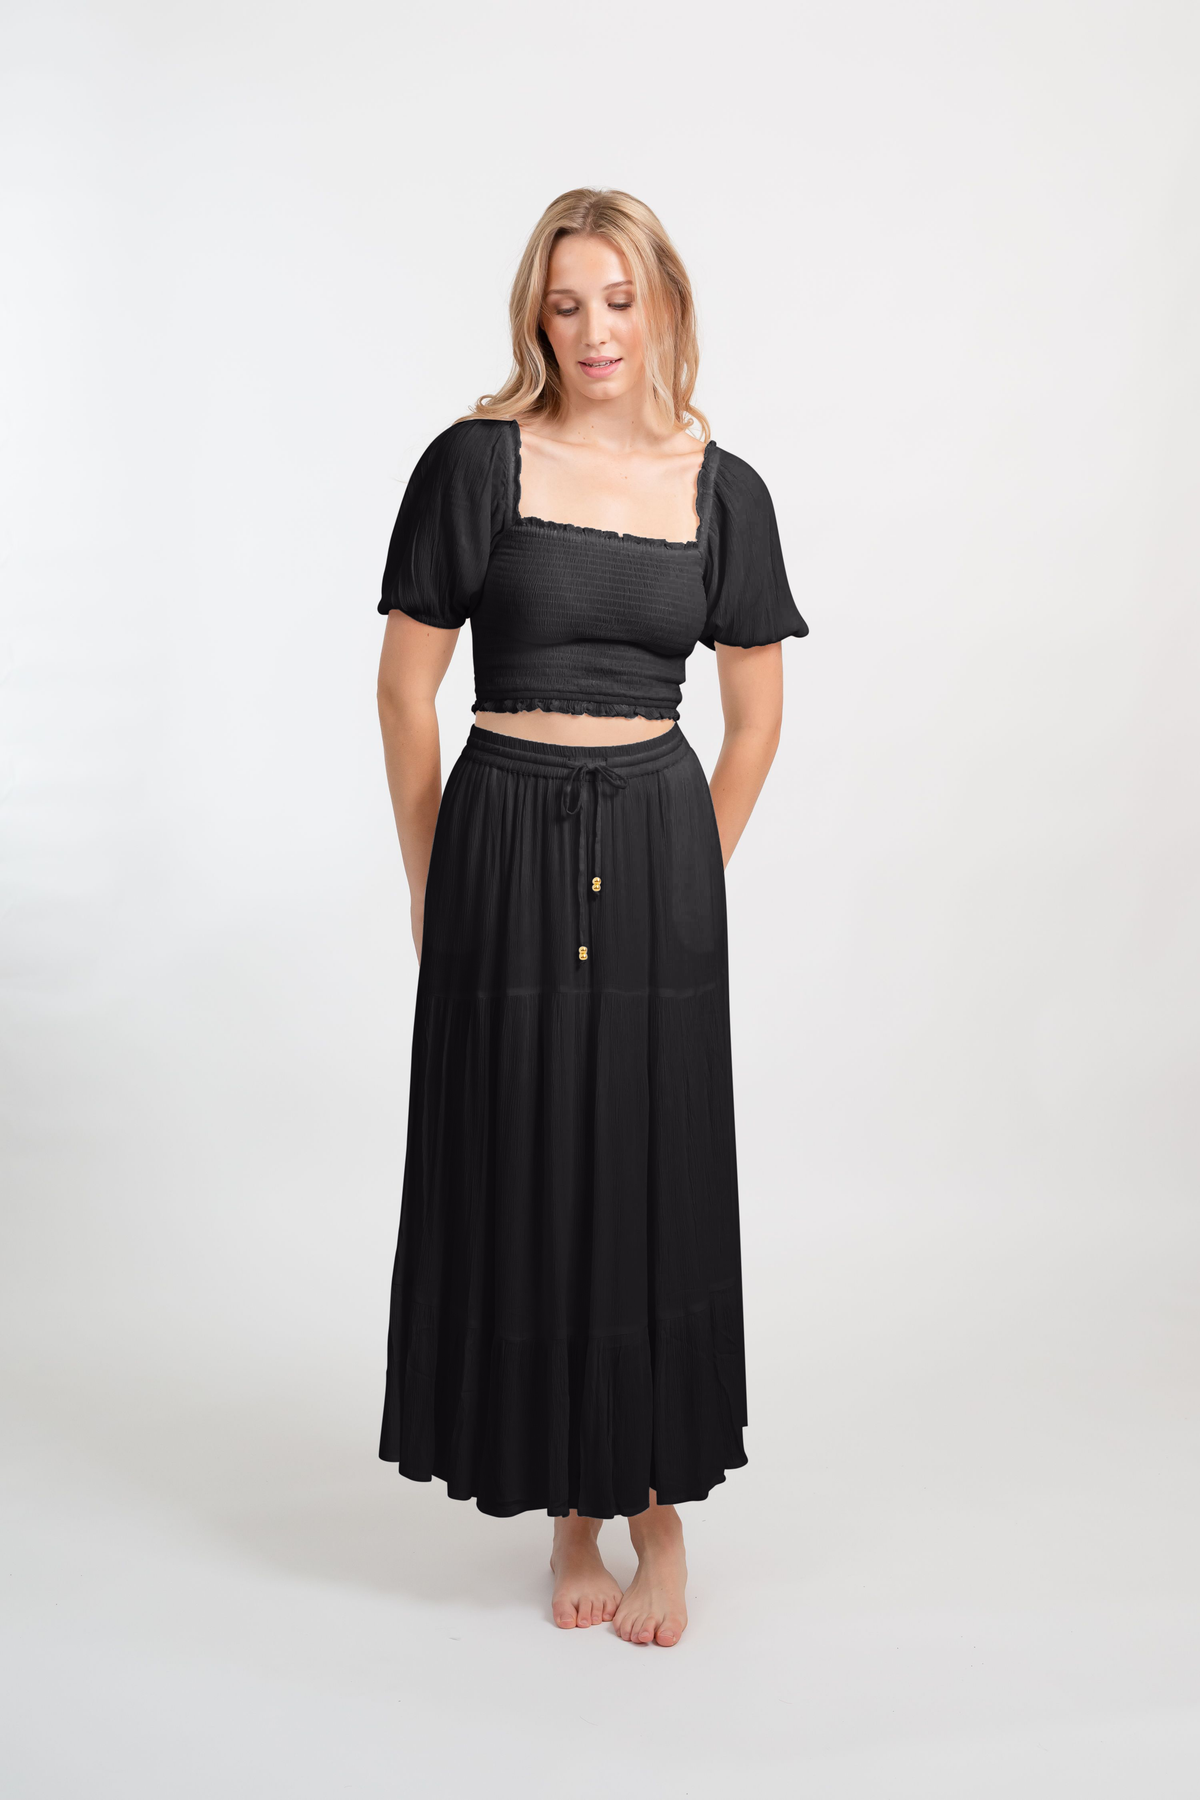 Miami Boho Smocked Crop Top with maxi skirt in black